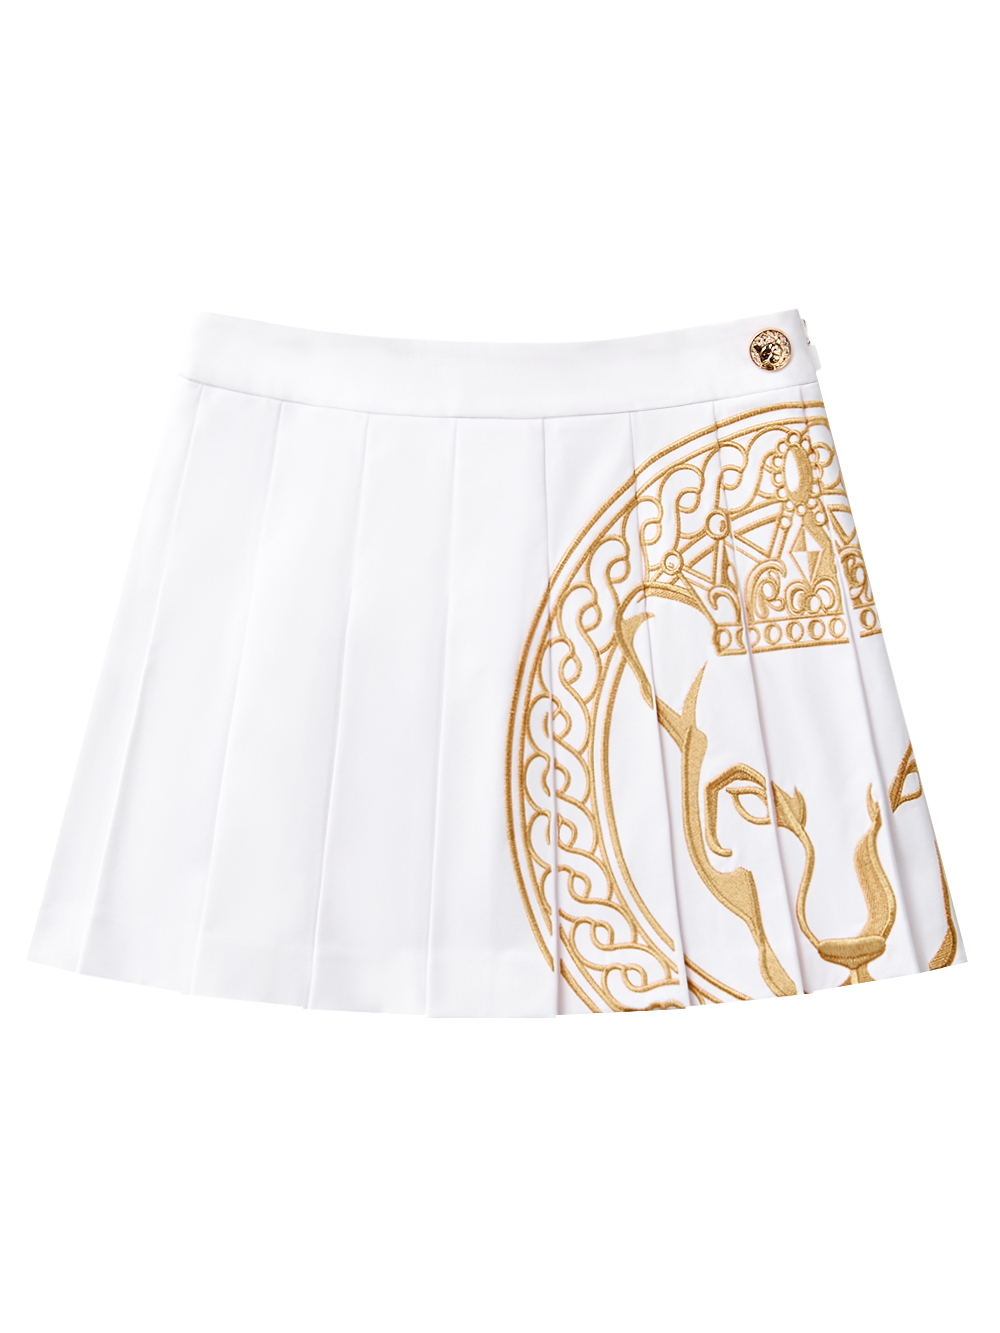 UTAA Golden Glossy Crown Panther Flare Skirt  : White(UD1SKF167WH)